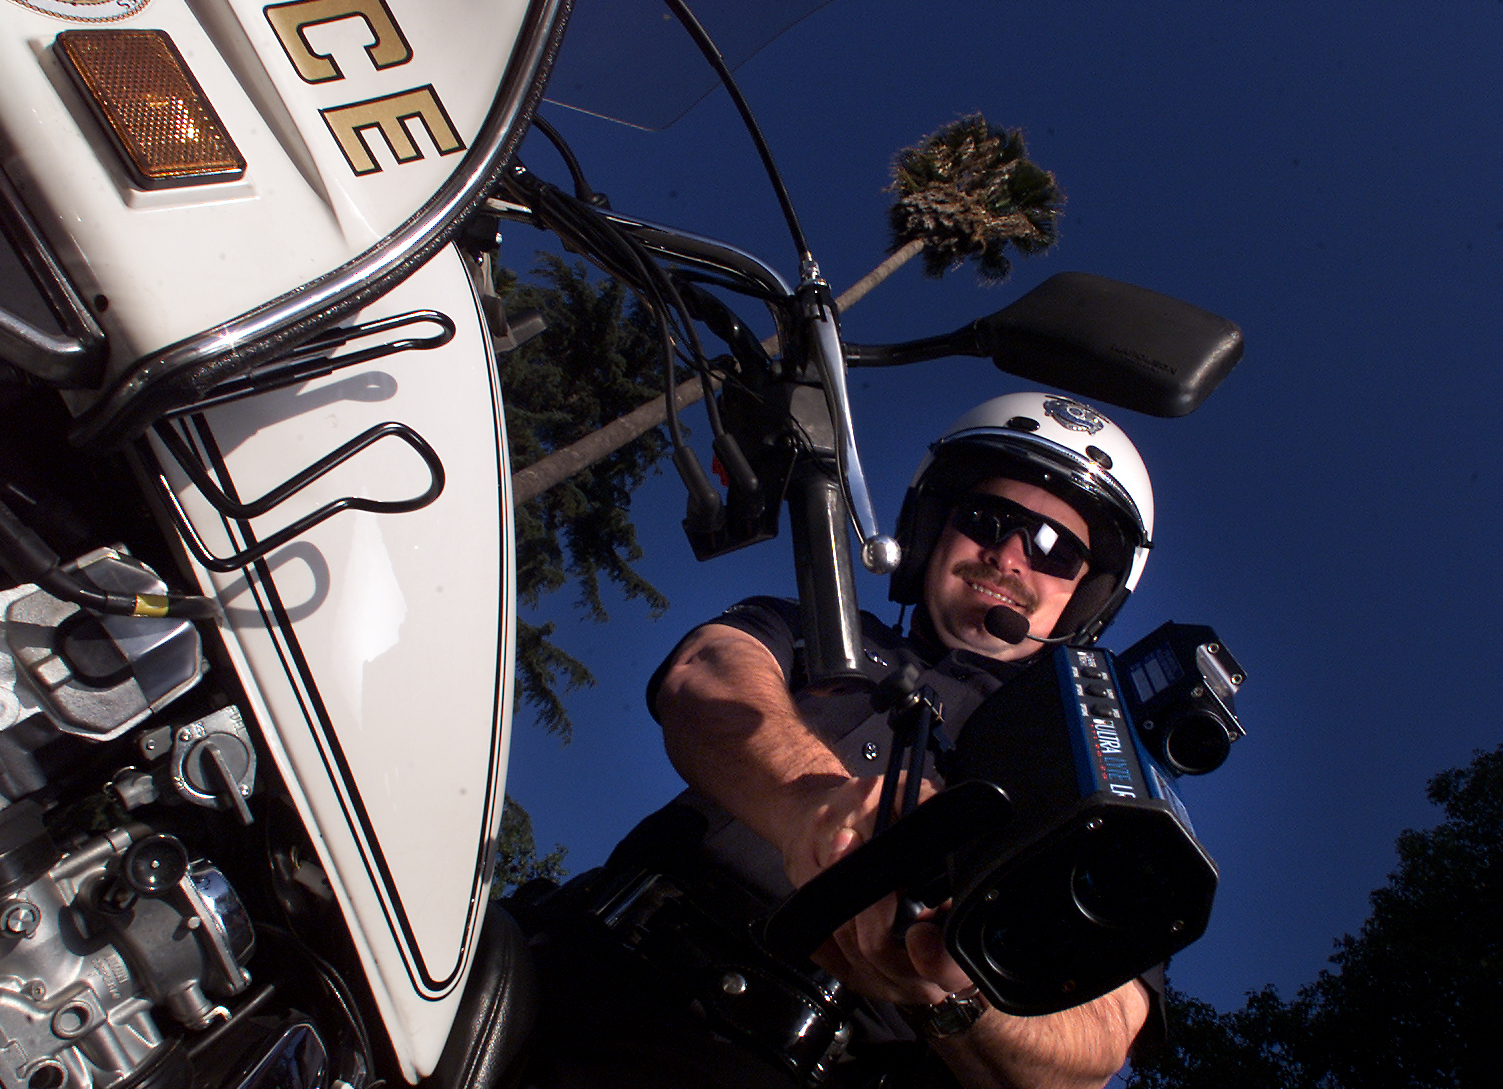 LAPD motor officer Troy Williams with his "Lidar" gun, a laser guided infrared radar, on Sherman Way